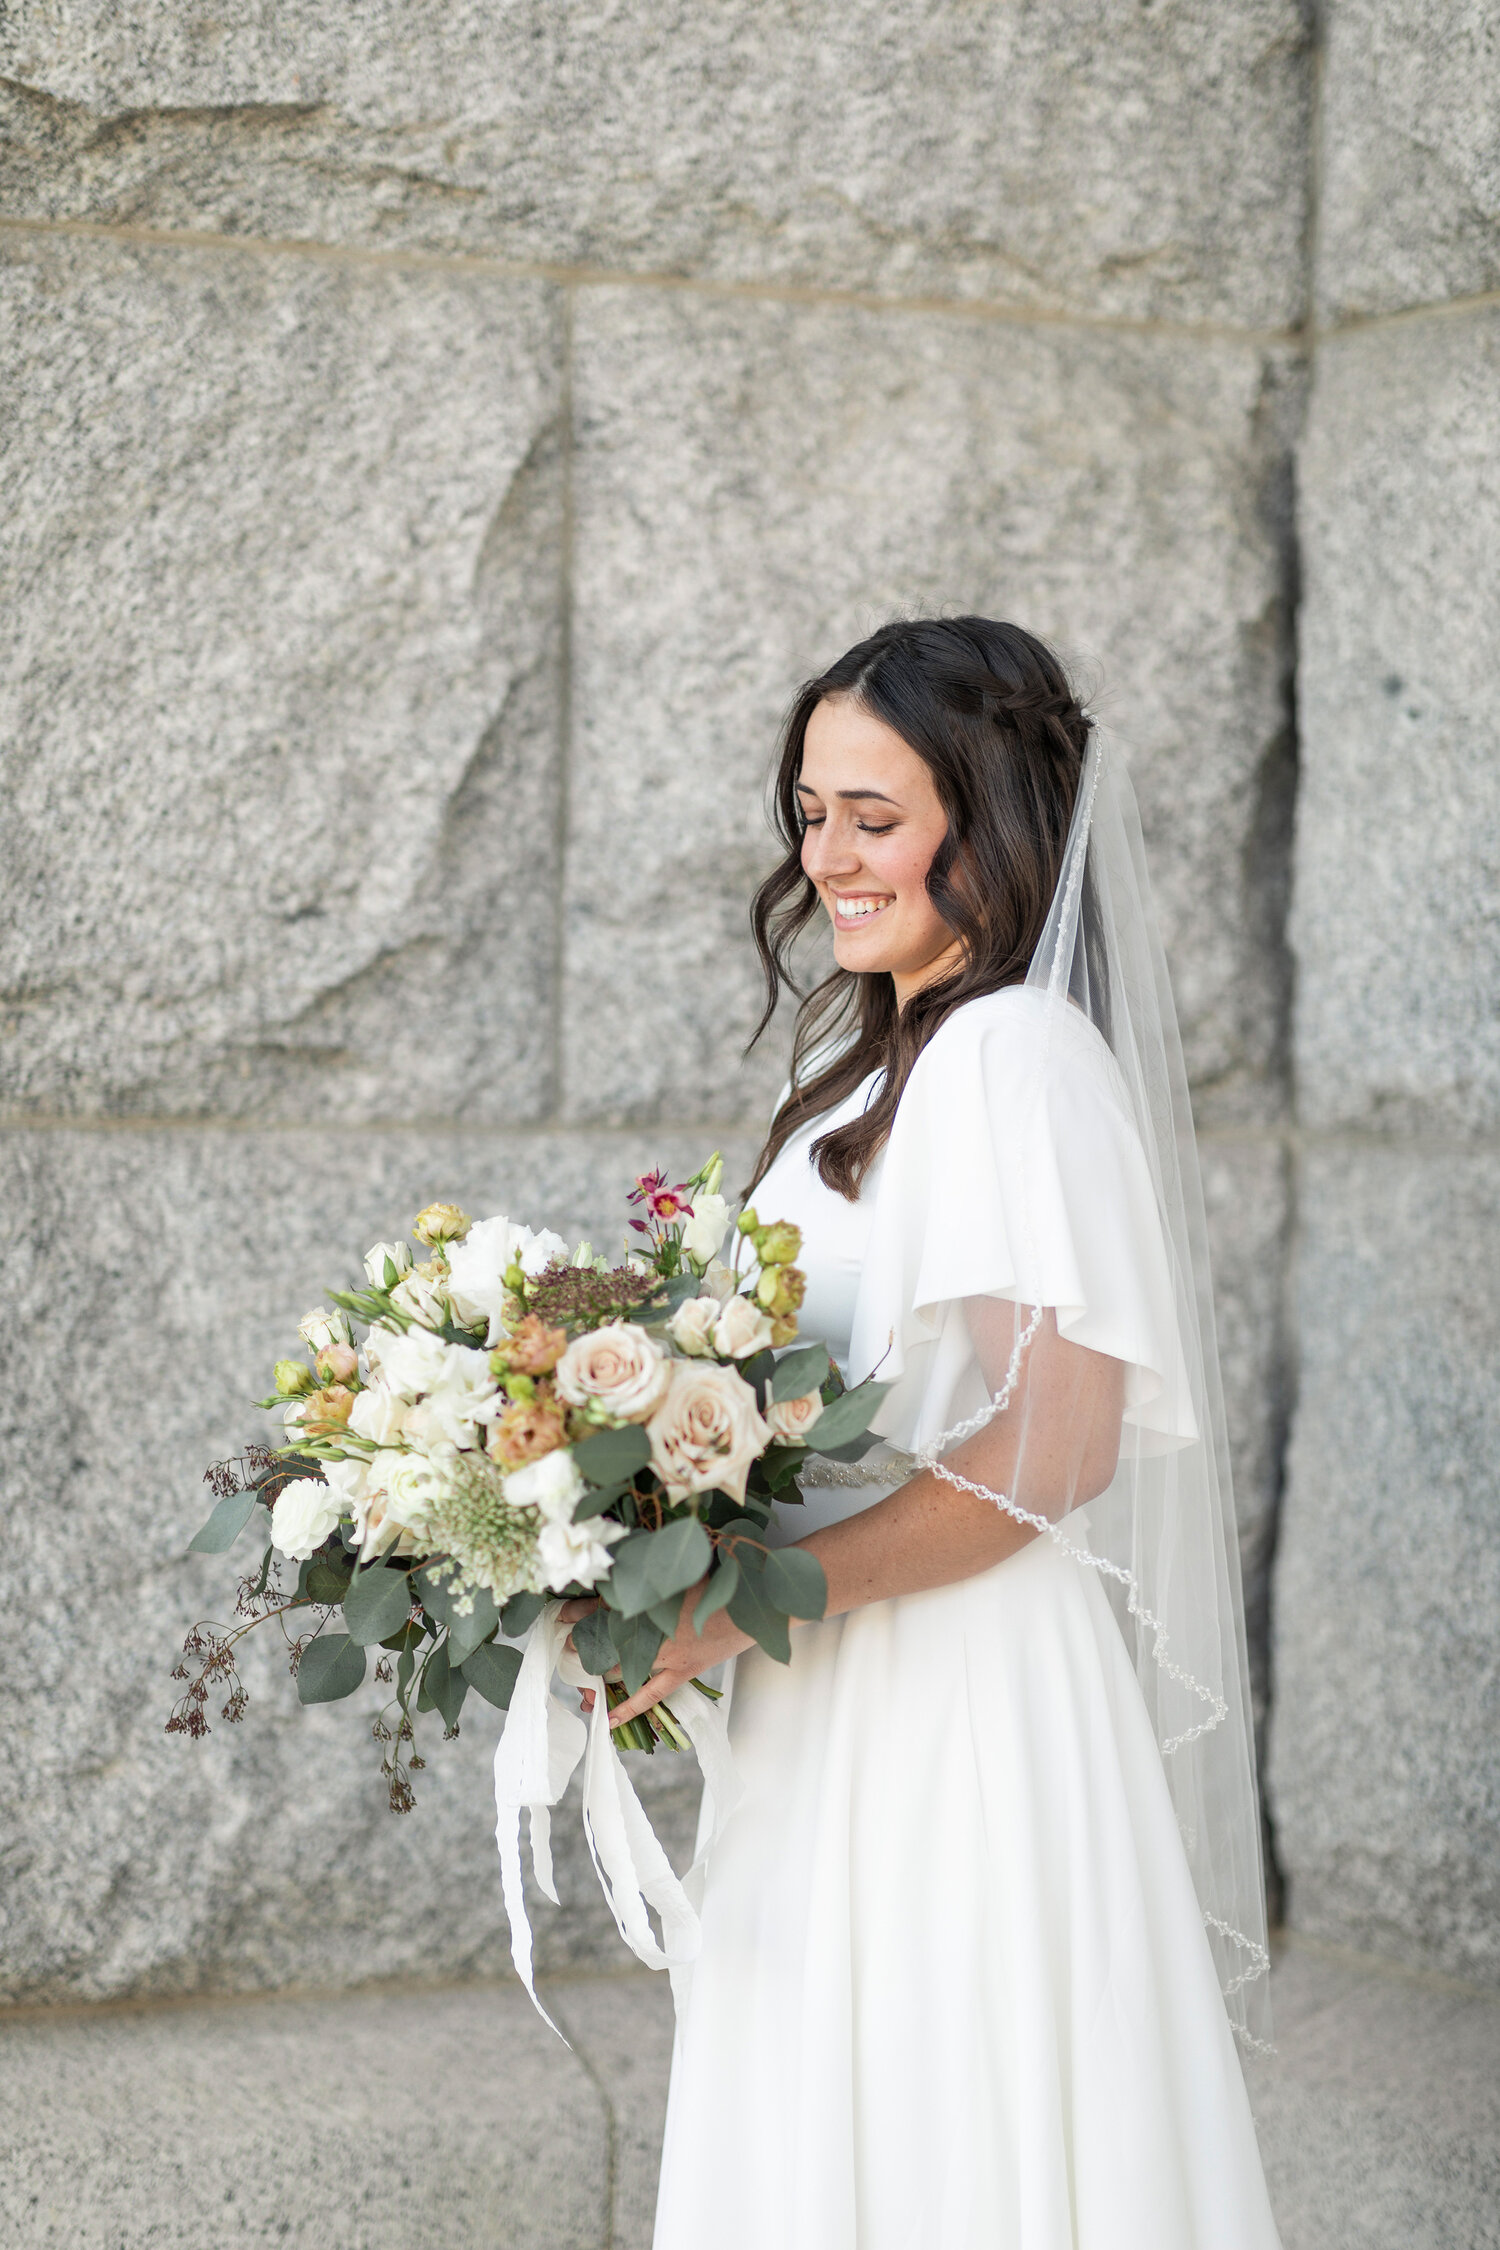 Here are 8 practical tips every bride should know on their big day